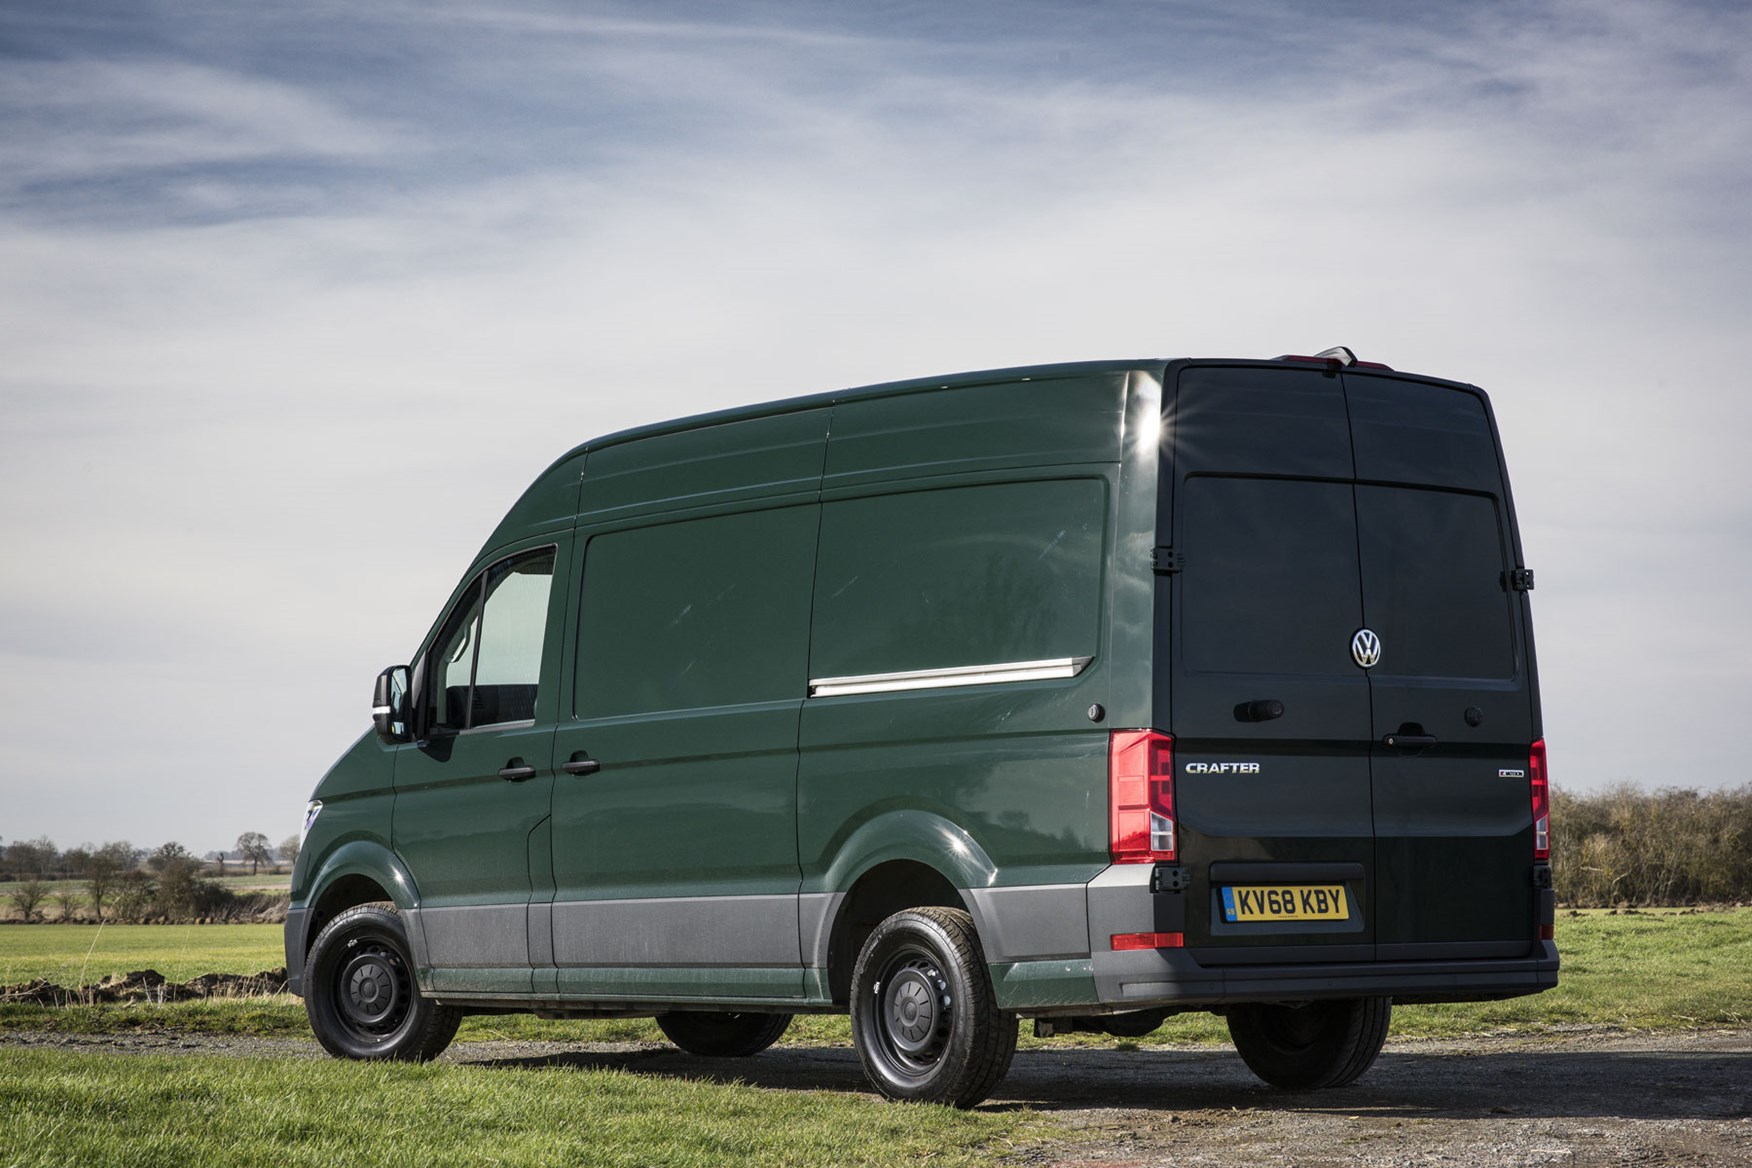 VW Crafter 4Motion review - Ontario Green, rear view